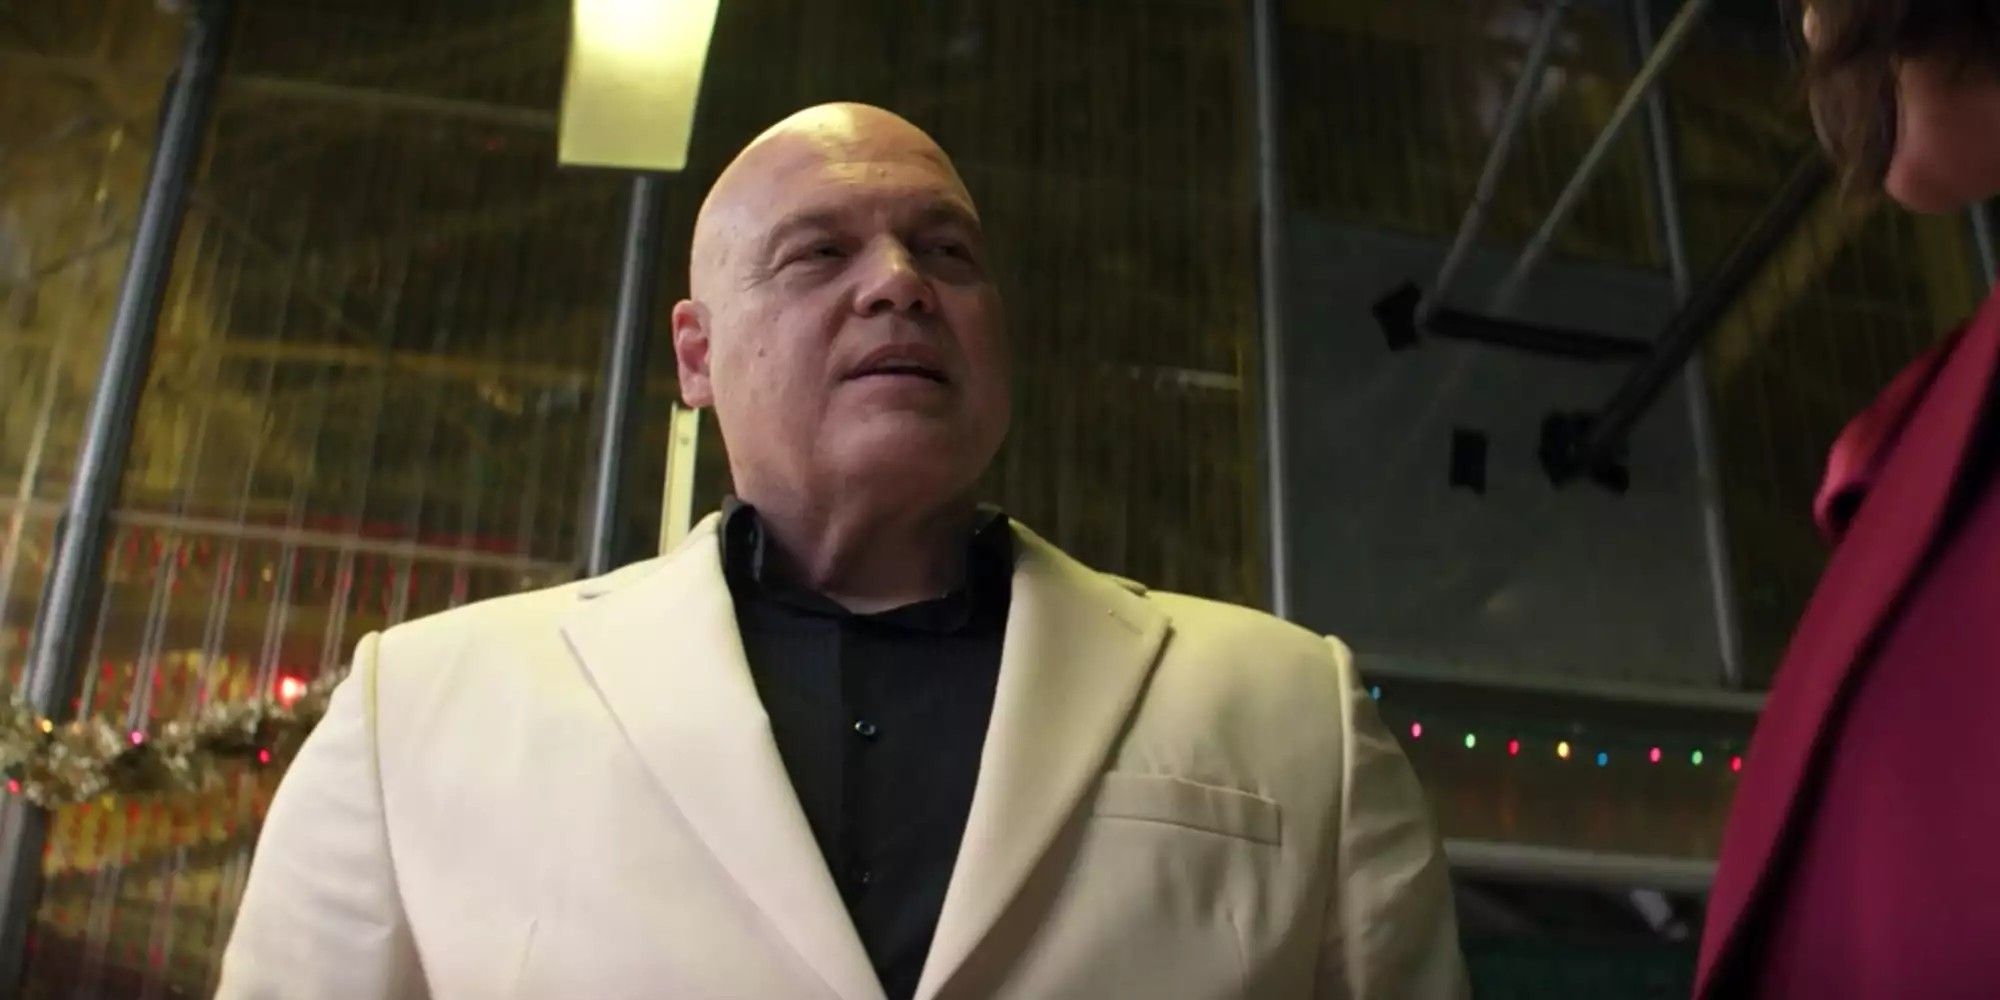 The Kingpin, played by Vincent D'Onofrio, in MCU's Hawkeye